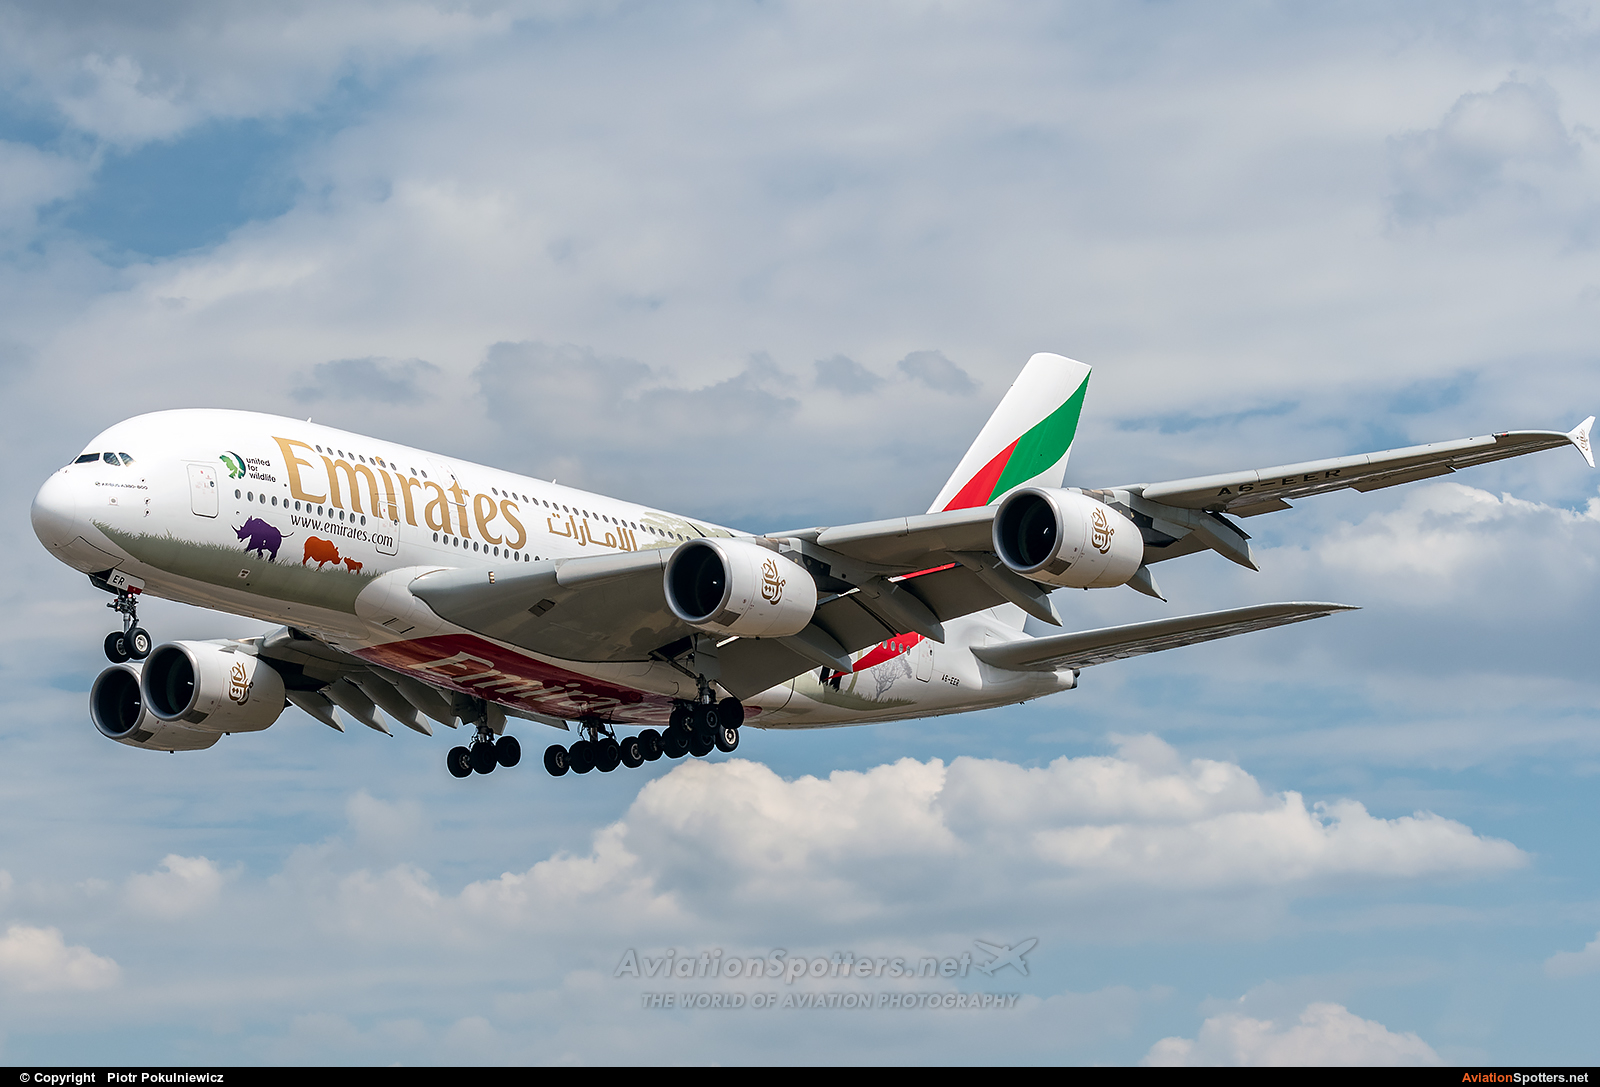 Emirates Airlines  -  A380  (A6-EER) By Piotr Pokulniewicz (Piciu)